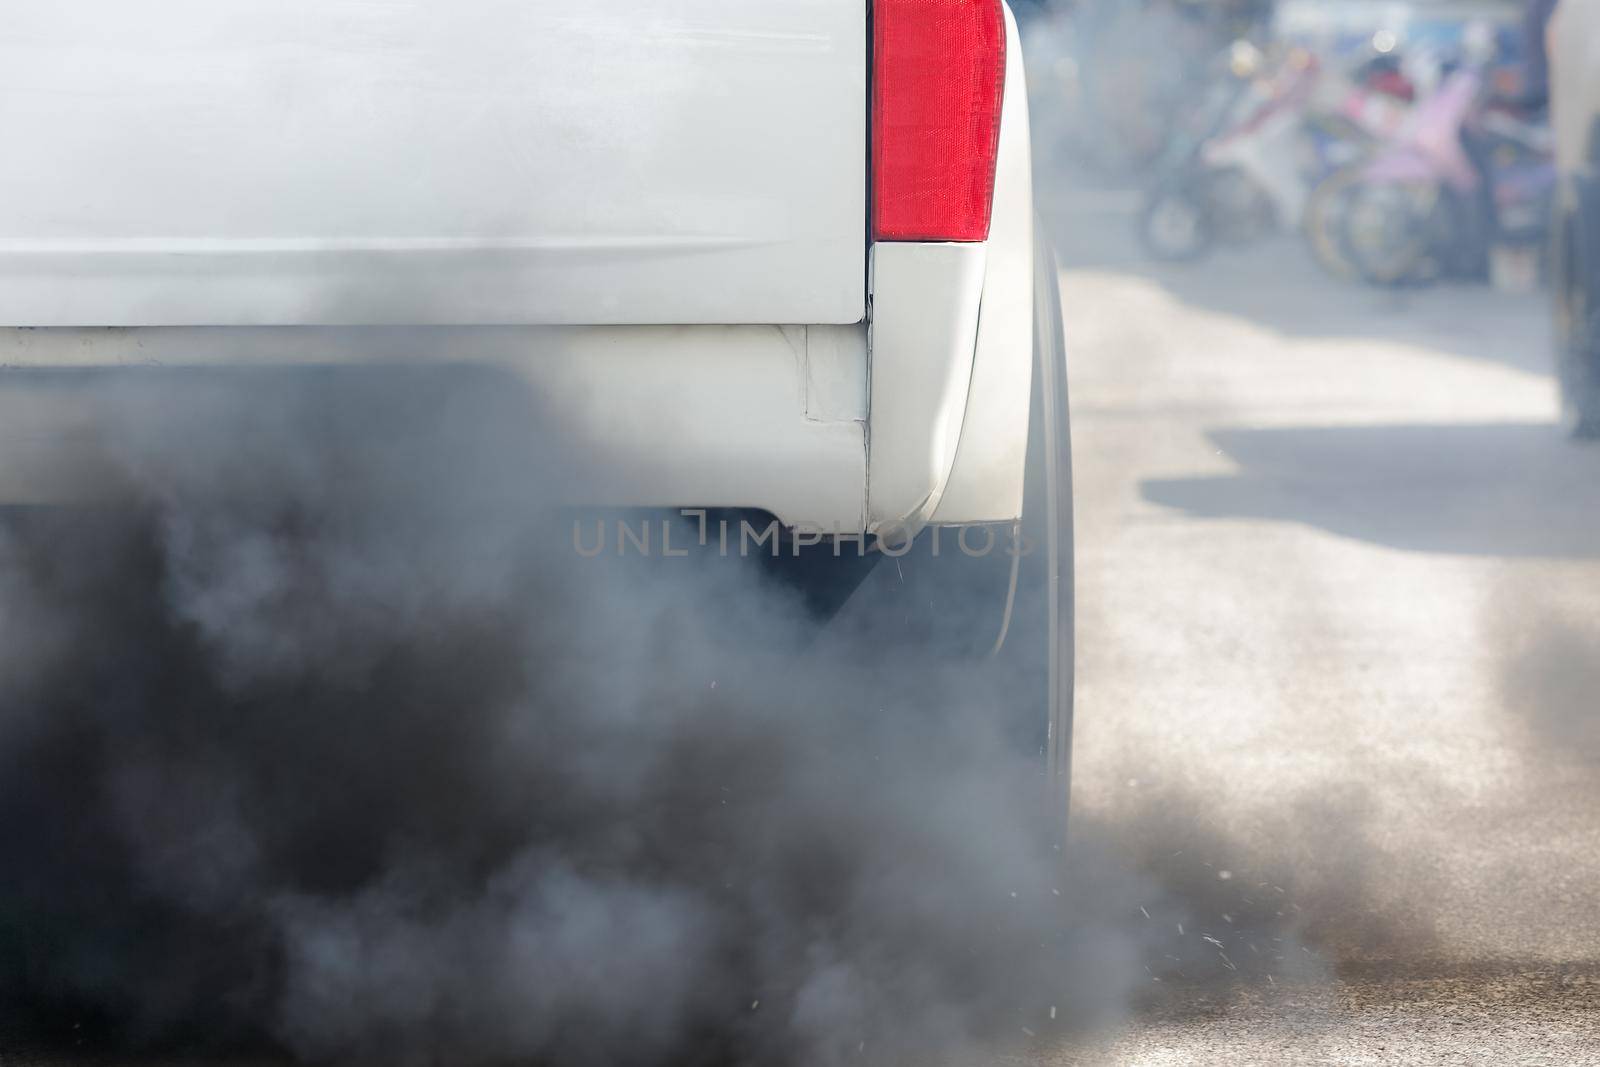 Air pollution from vehicle exhaust pipe on road